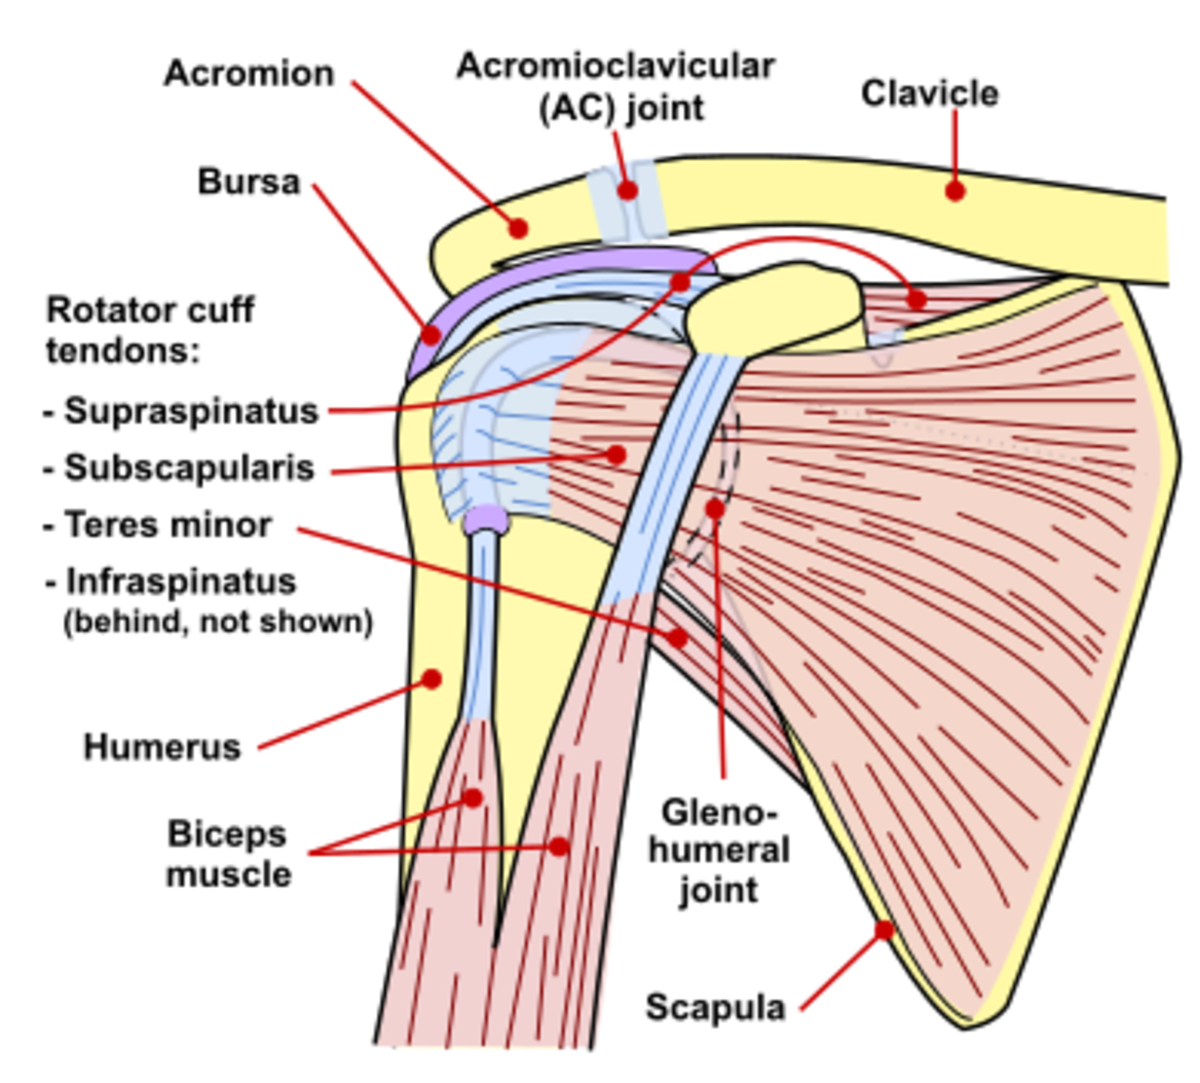 The rotator cuff muscles support shoulder movement and stabilize the shoulder joint.